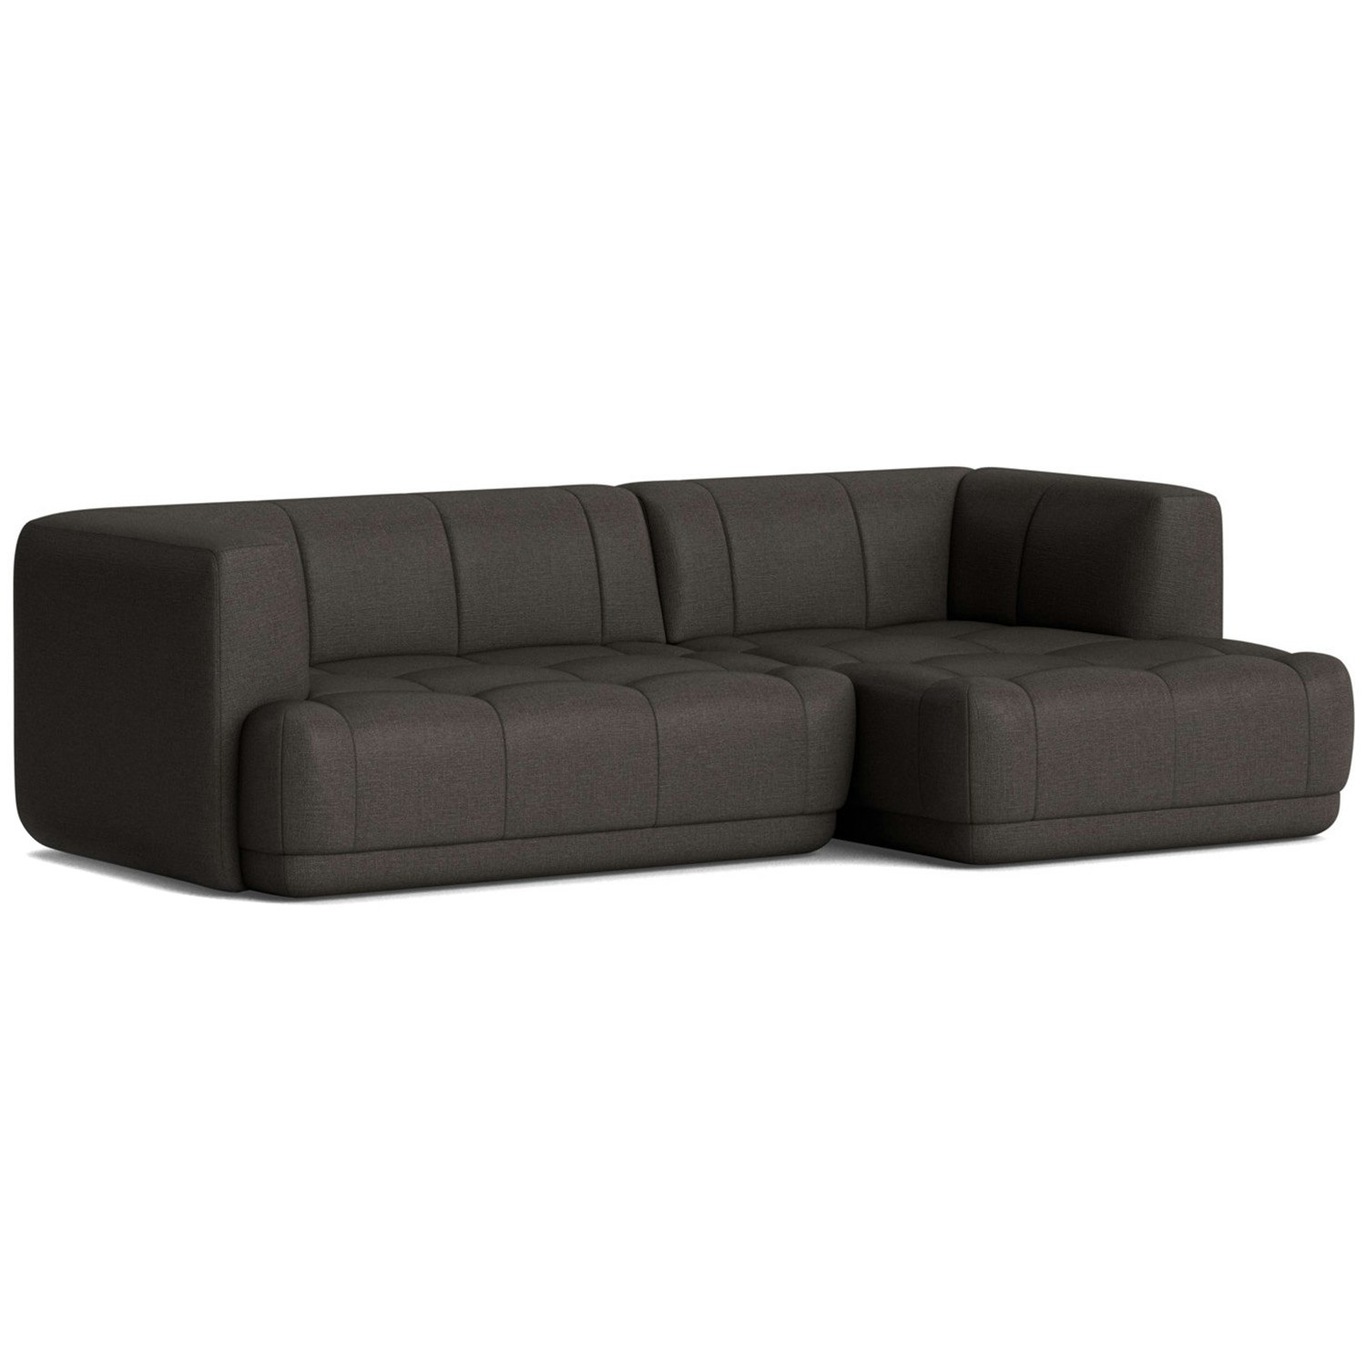 Quilton 3-Seater Sofa Configuration 19 Right, Roden 06